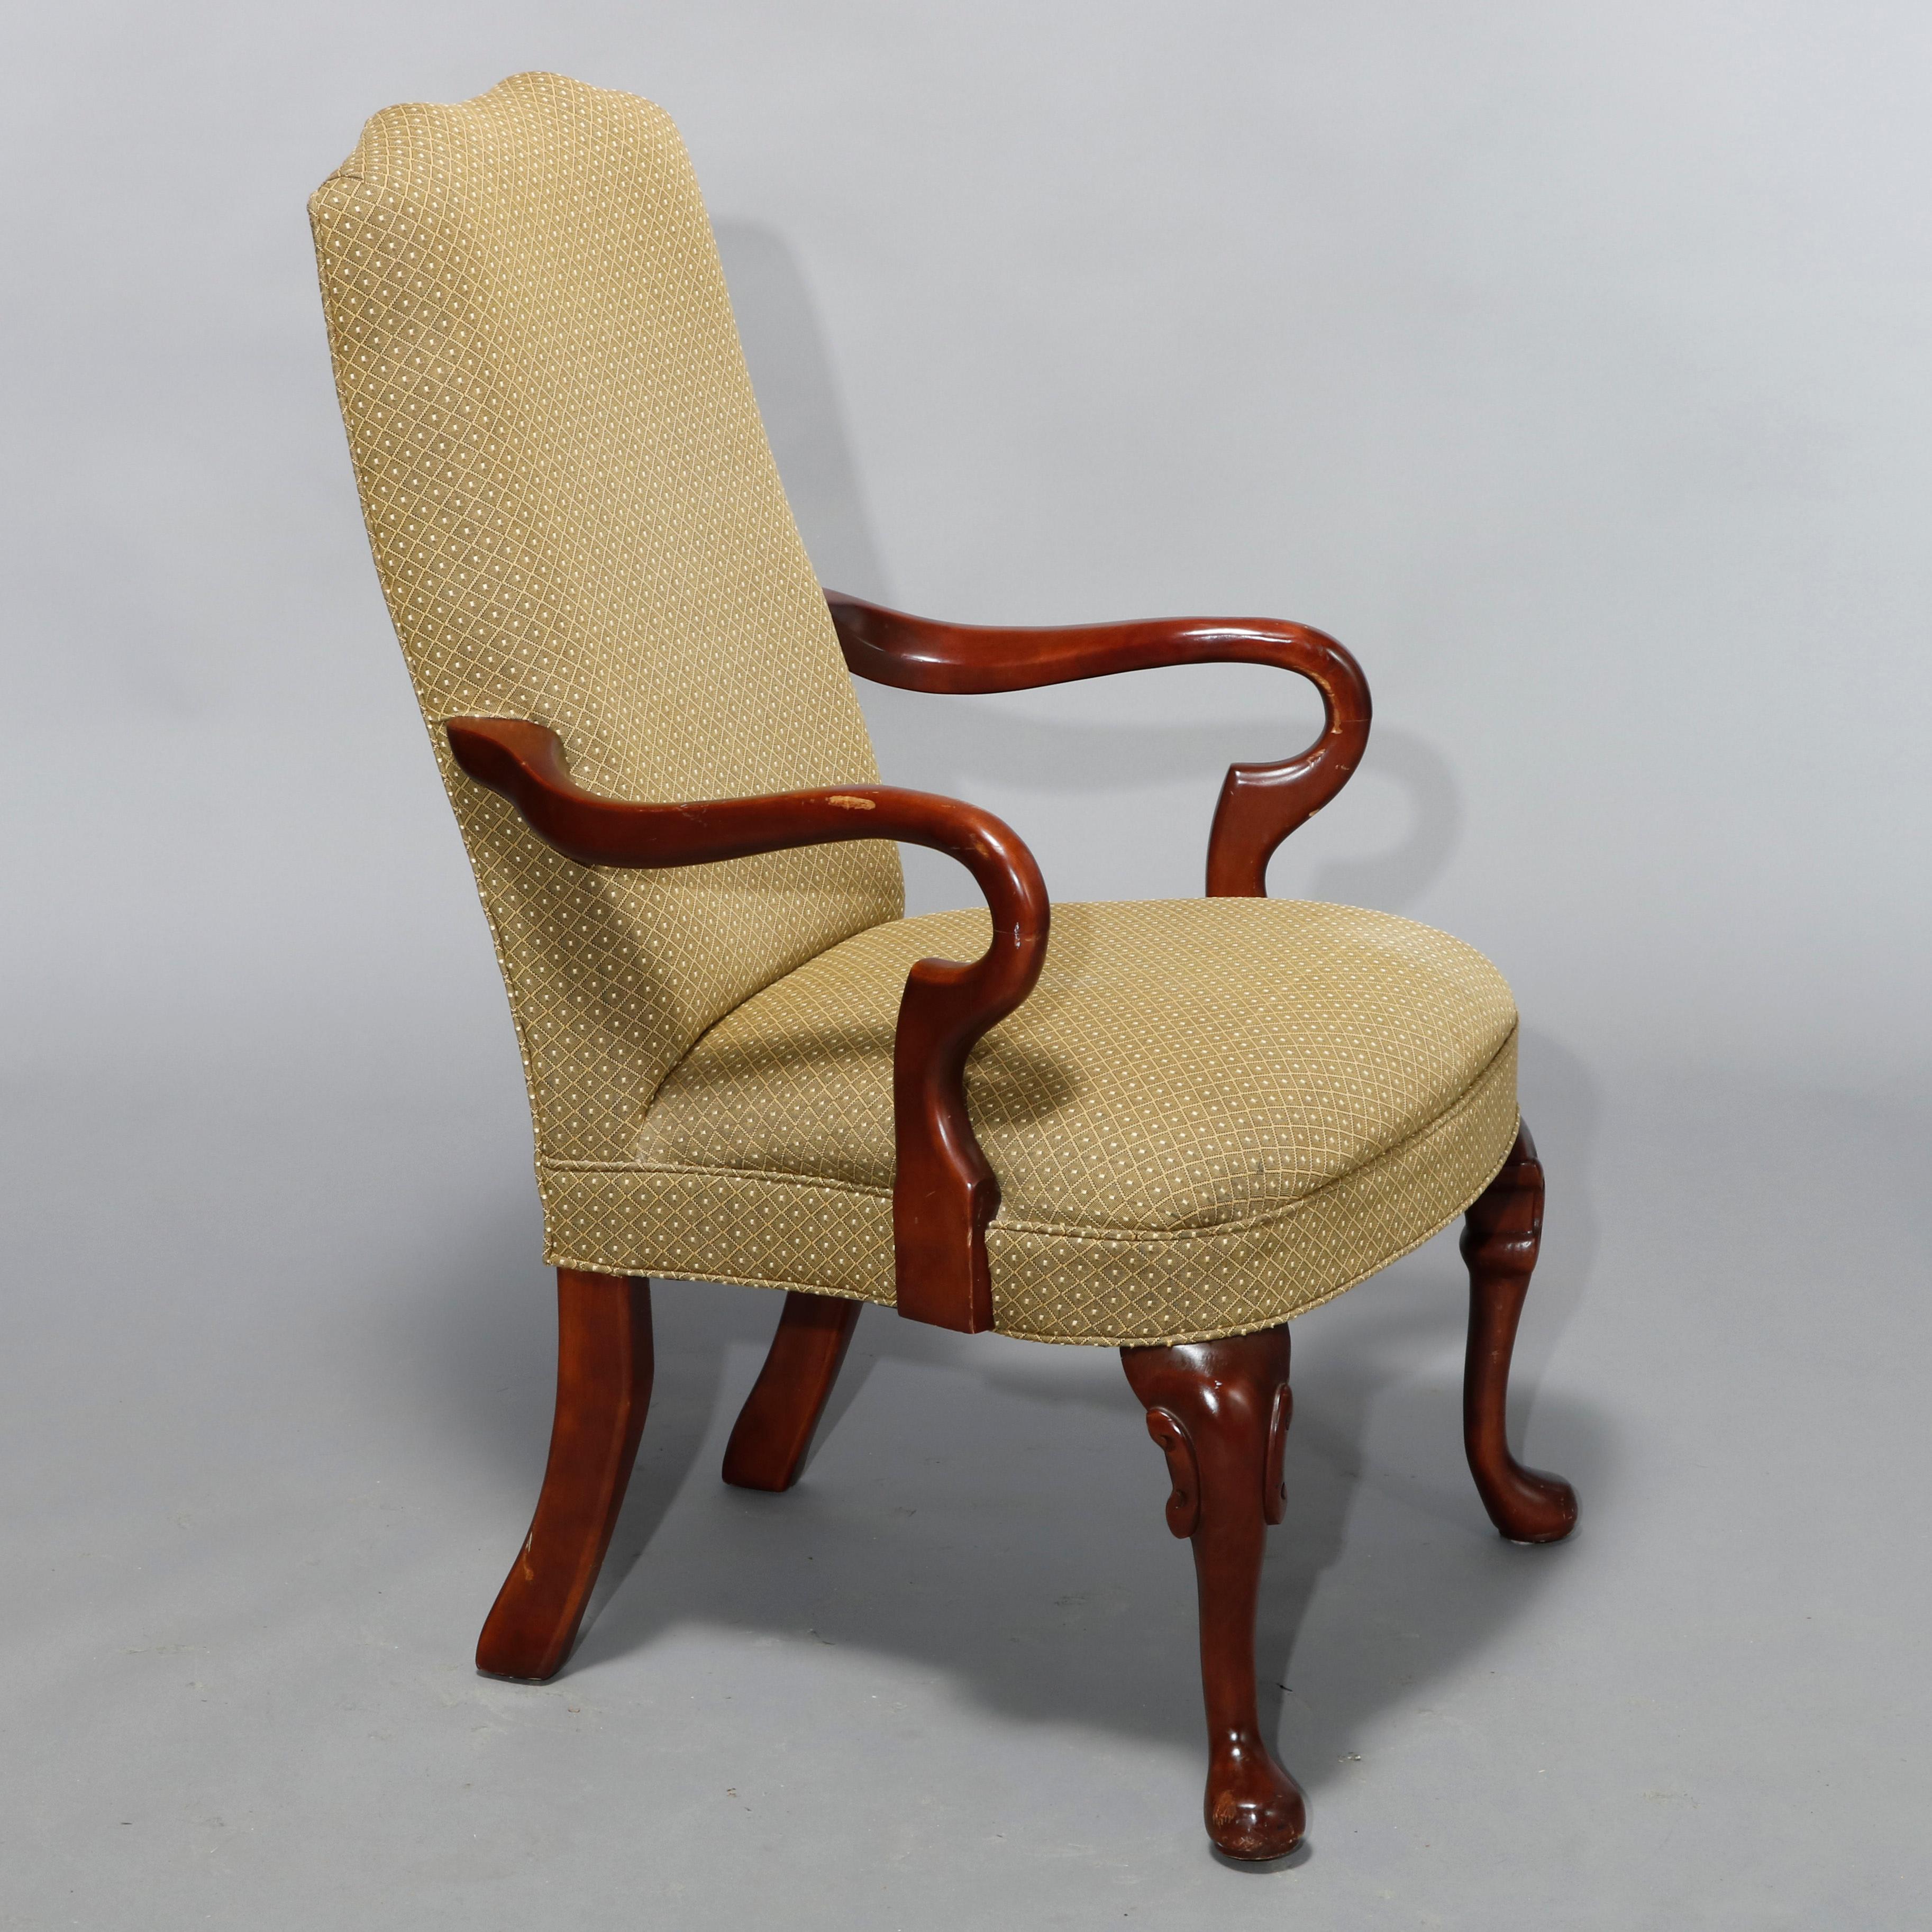 An antique pair of Queen Anne style fireside armchairs offer shaped and upholstered backs and seats on mahogany frames with scroll arms and cabriole legs having carved knees and pad feet, 20th century

Measures: 41.75